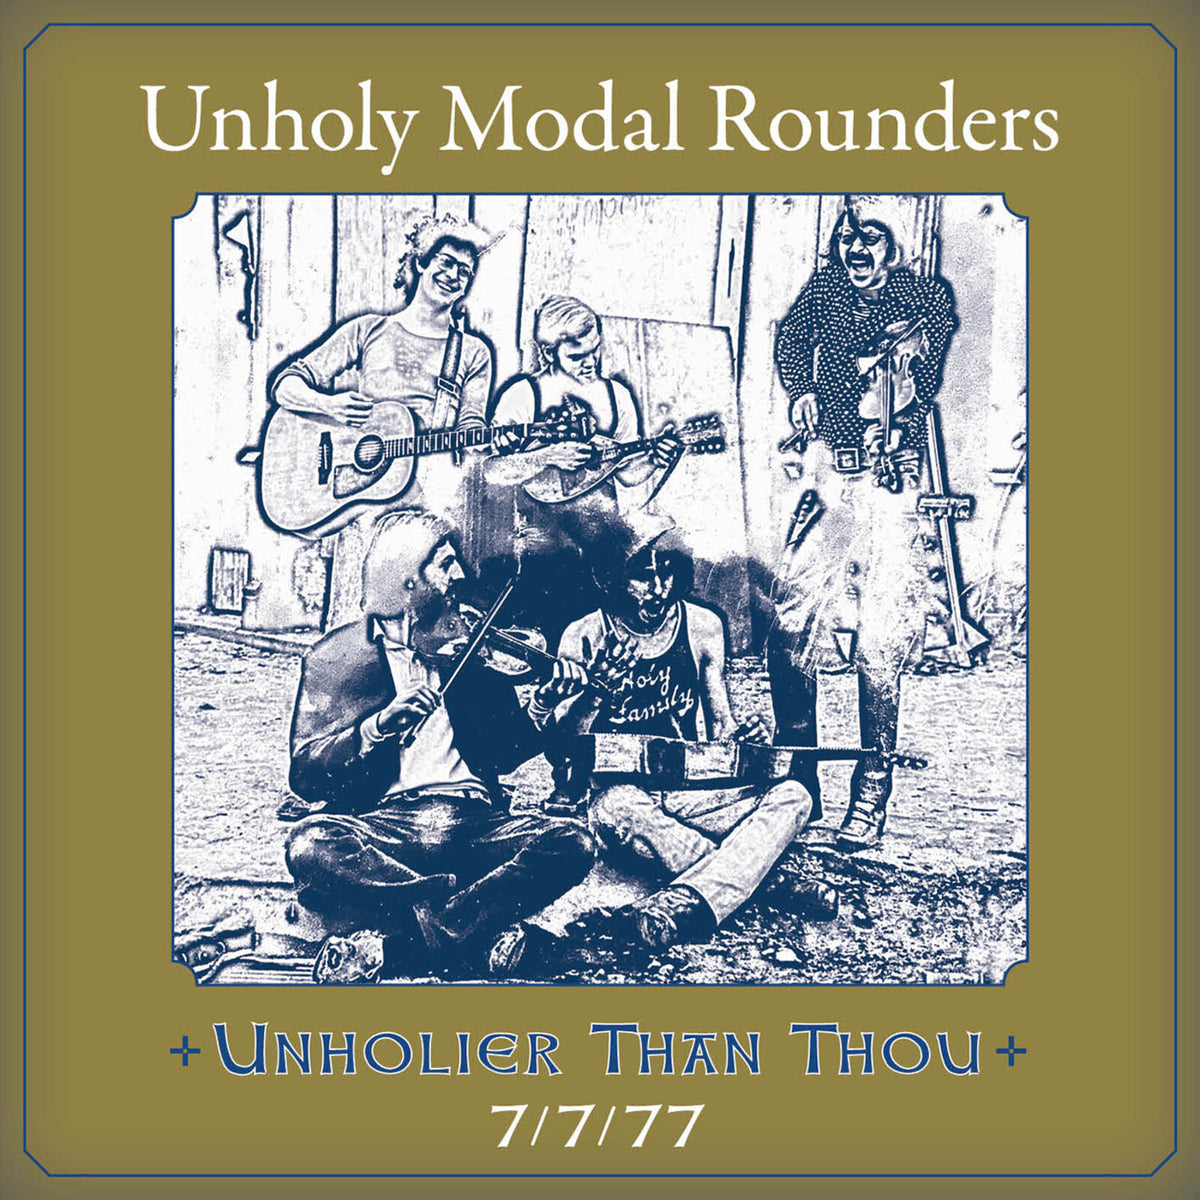 The Unholy Modal Rounders - Unholier Than Thou: 7/7/77 - CDDG267